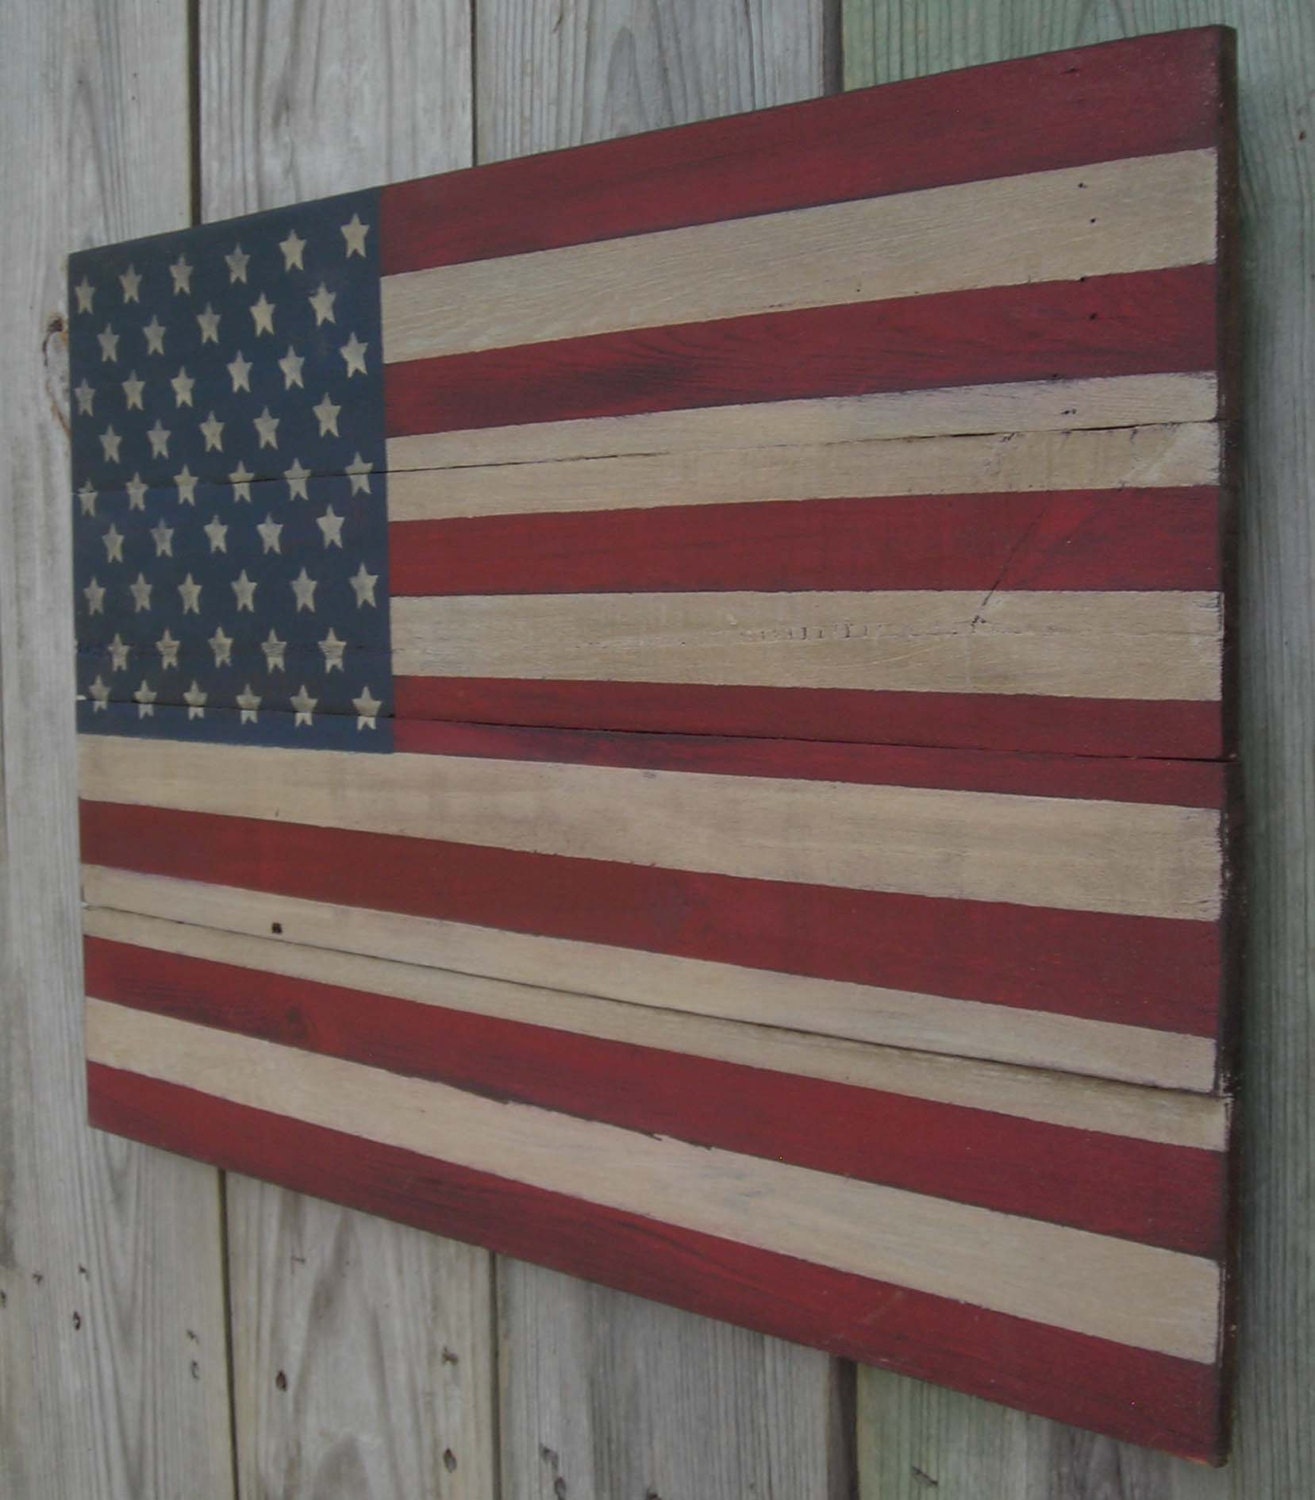 Weathered Aged Wooden American Flag 16 1/2 X 24 inches. Made